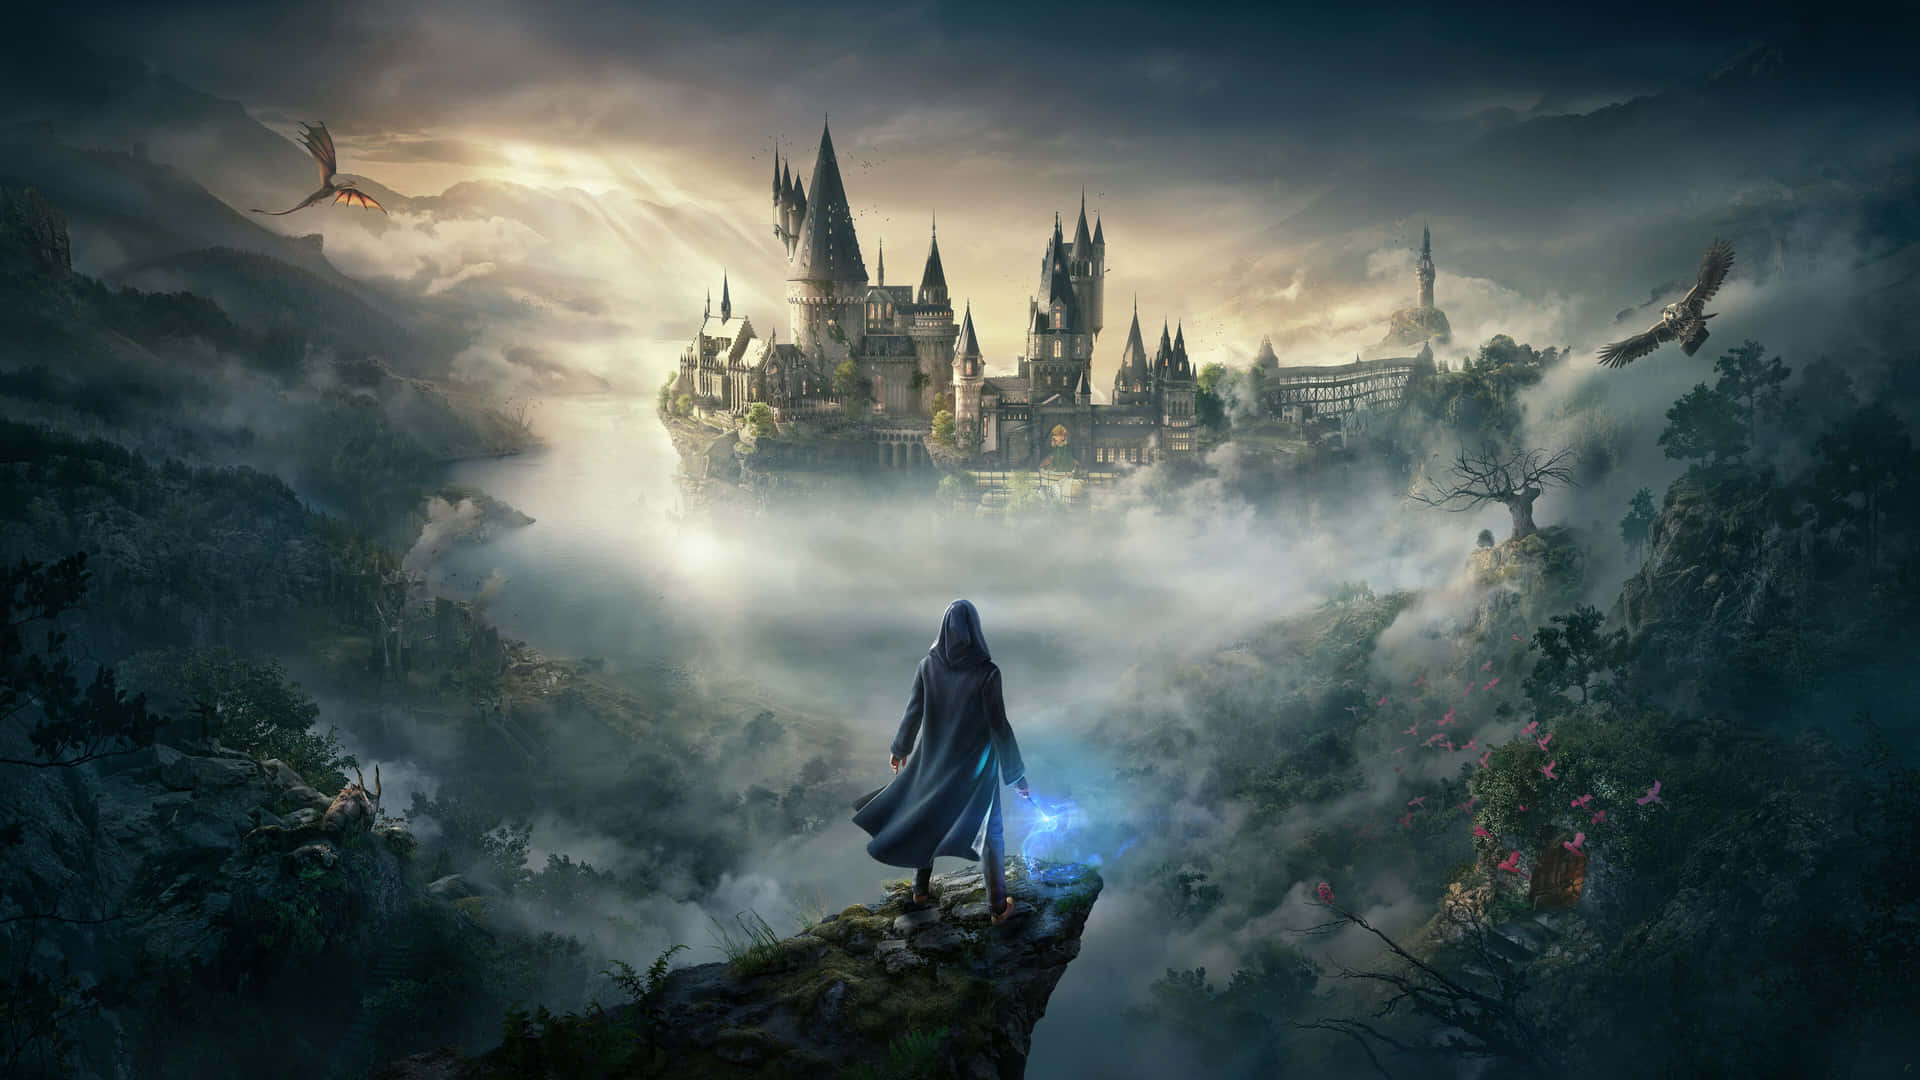 Enter the magical world of Harry Potter with this 4K wallpaper Wallpaper